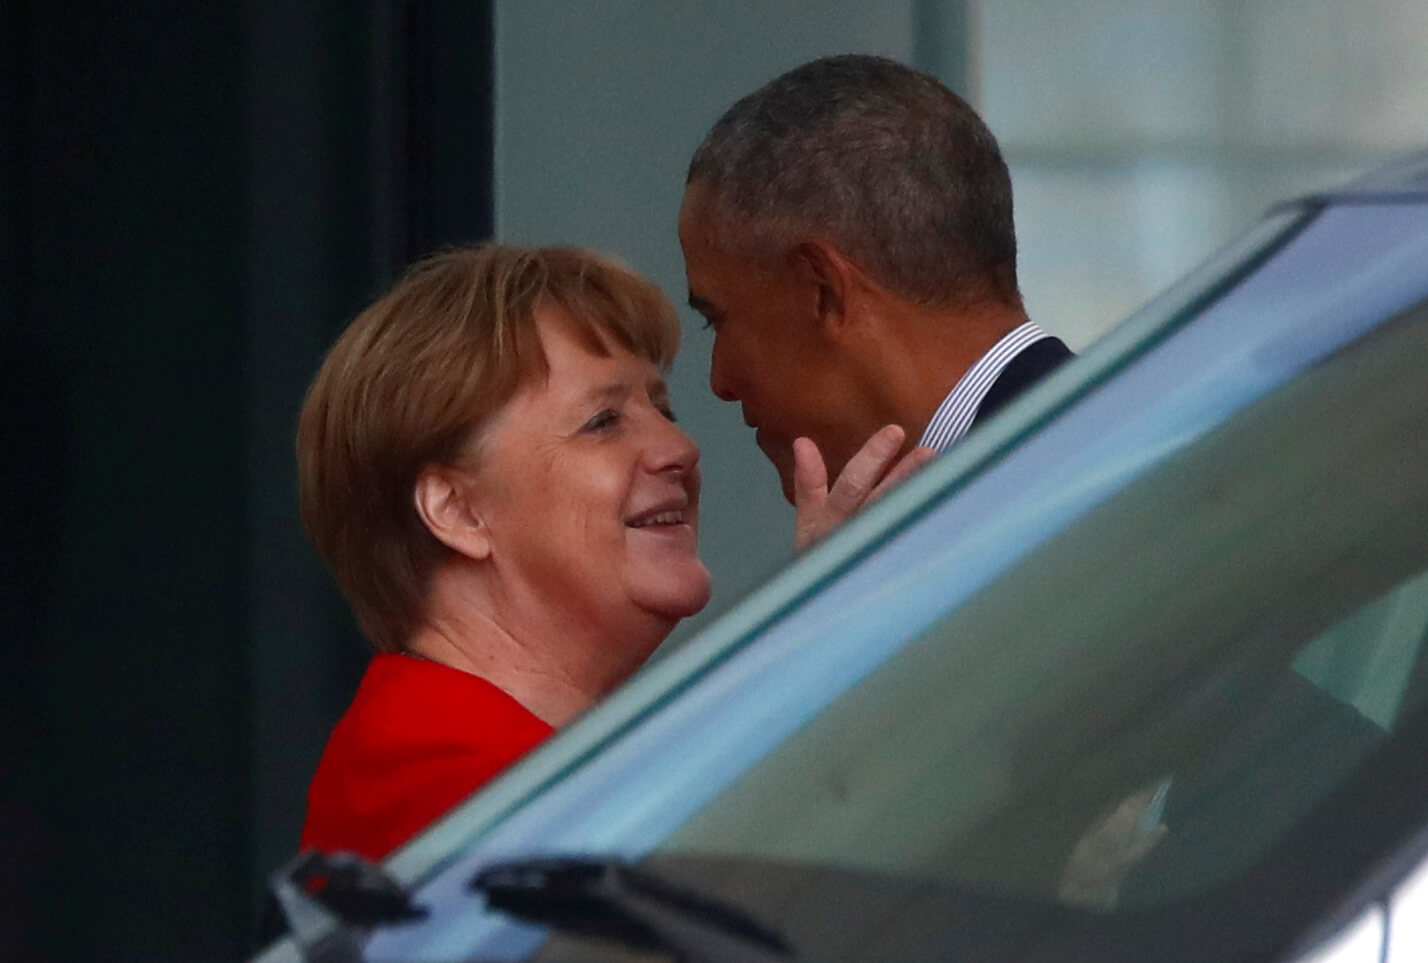 Former U.S. President Barack Obama leaves after a meeting with German Chancellor Angela Merkel at the chancellery in Berlin, Germany April 5, 2019. REUTERS/Hannibal Hanschke